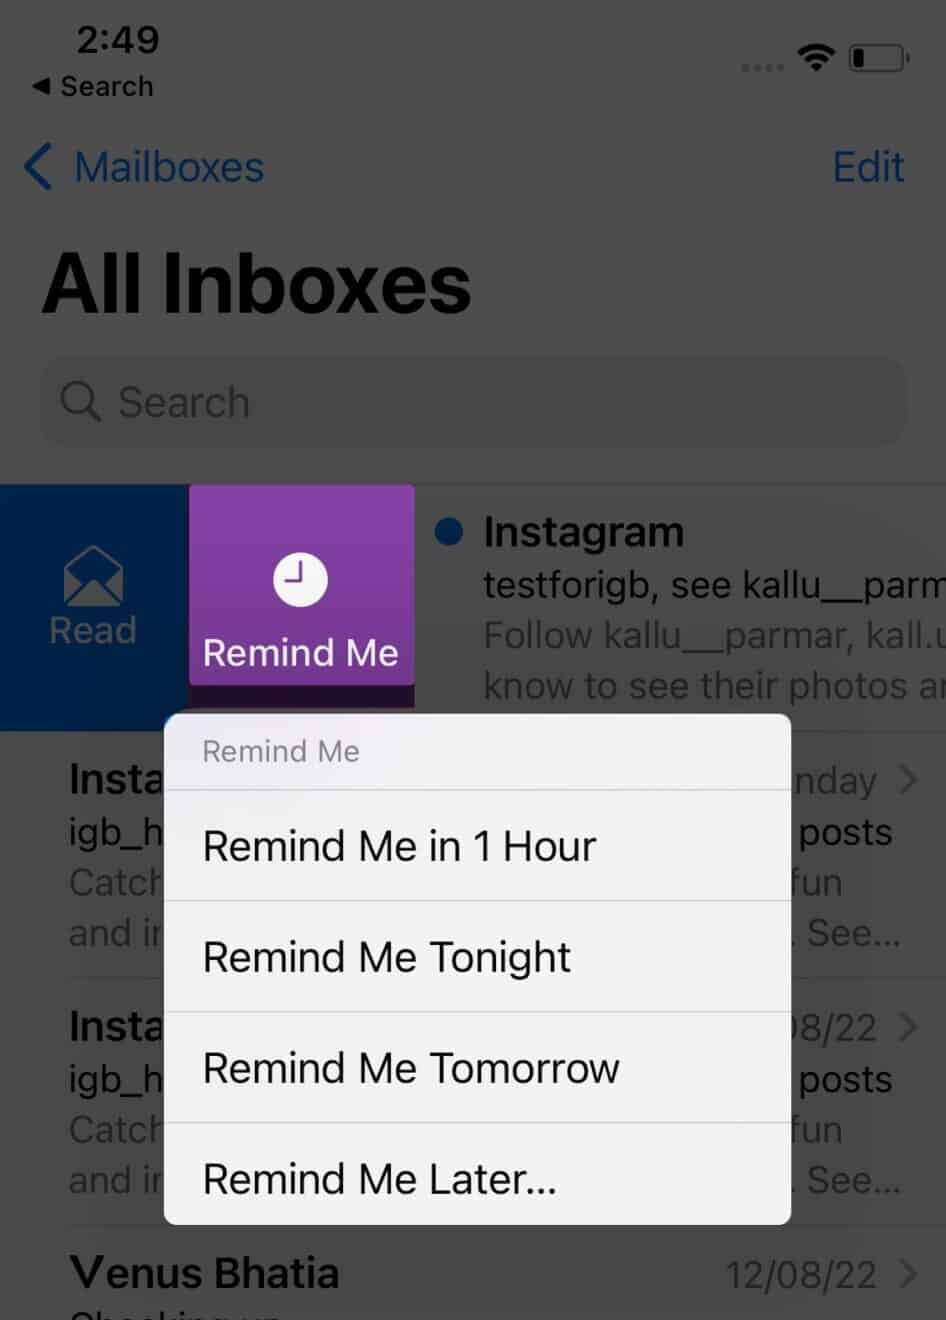 Remind Me feature in Apple Mail on an iPhone